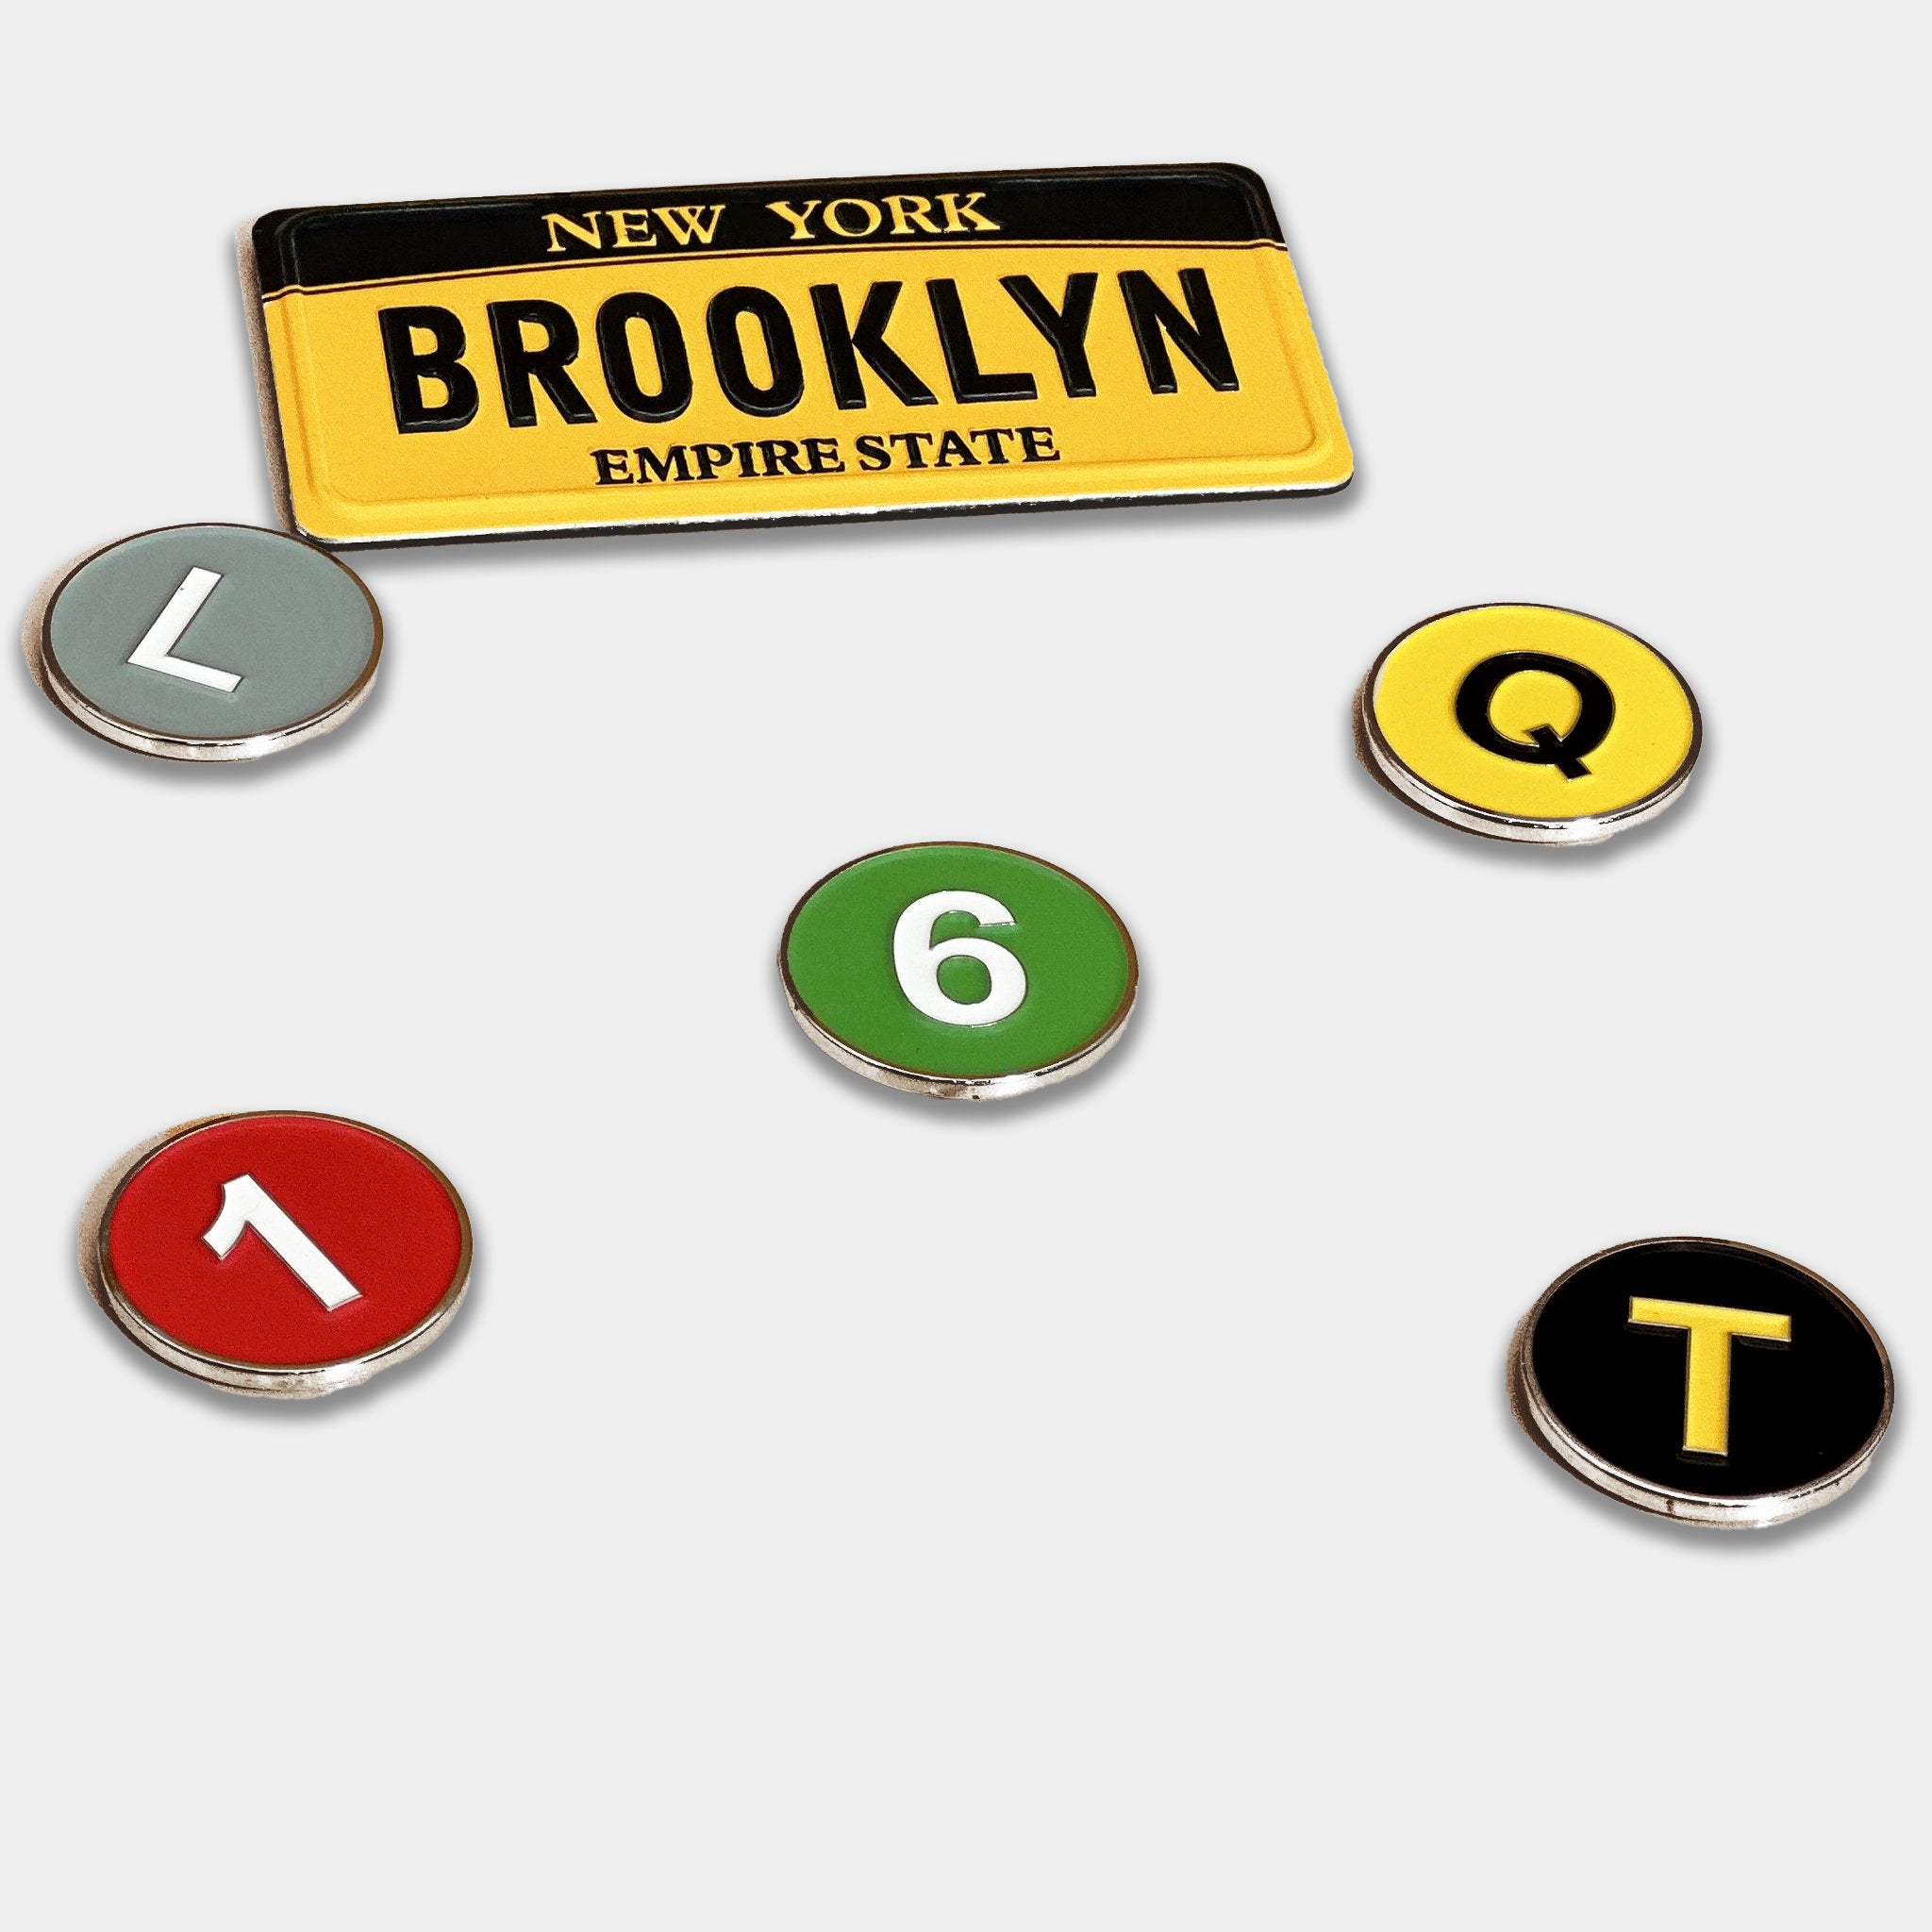 Subway line Golf Ball Markers with the L, 1, Q, T, and 6 train.